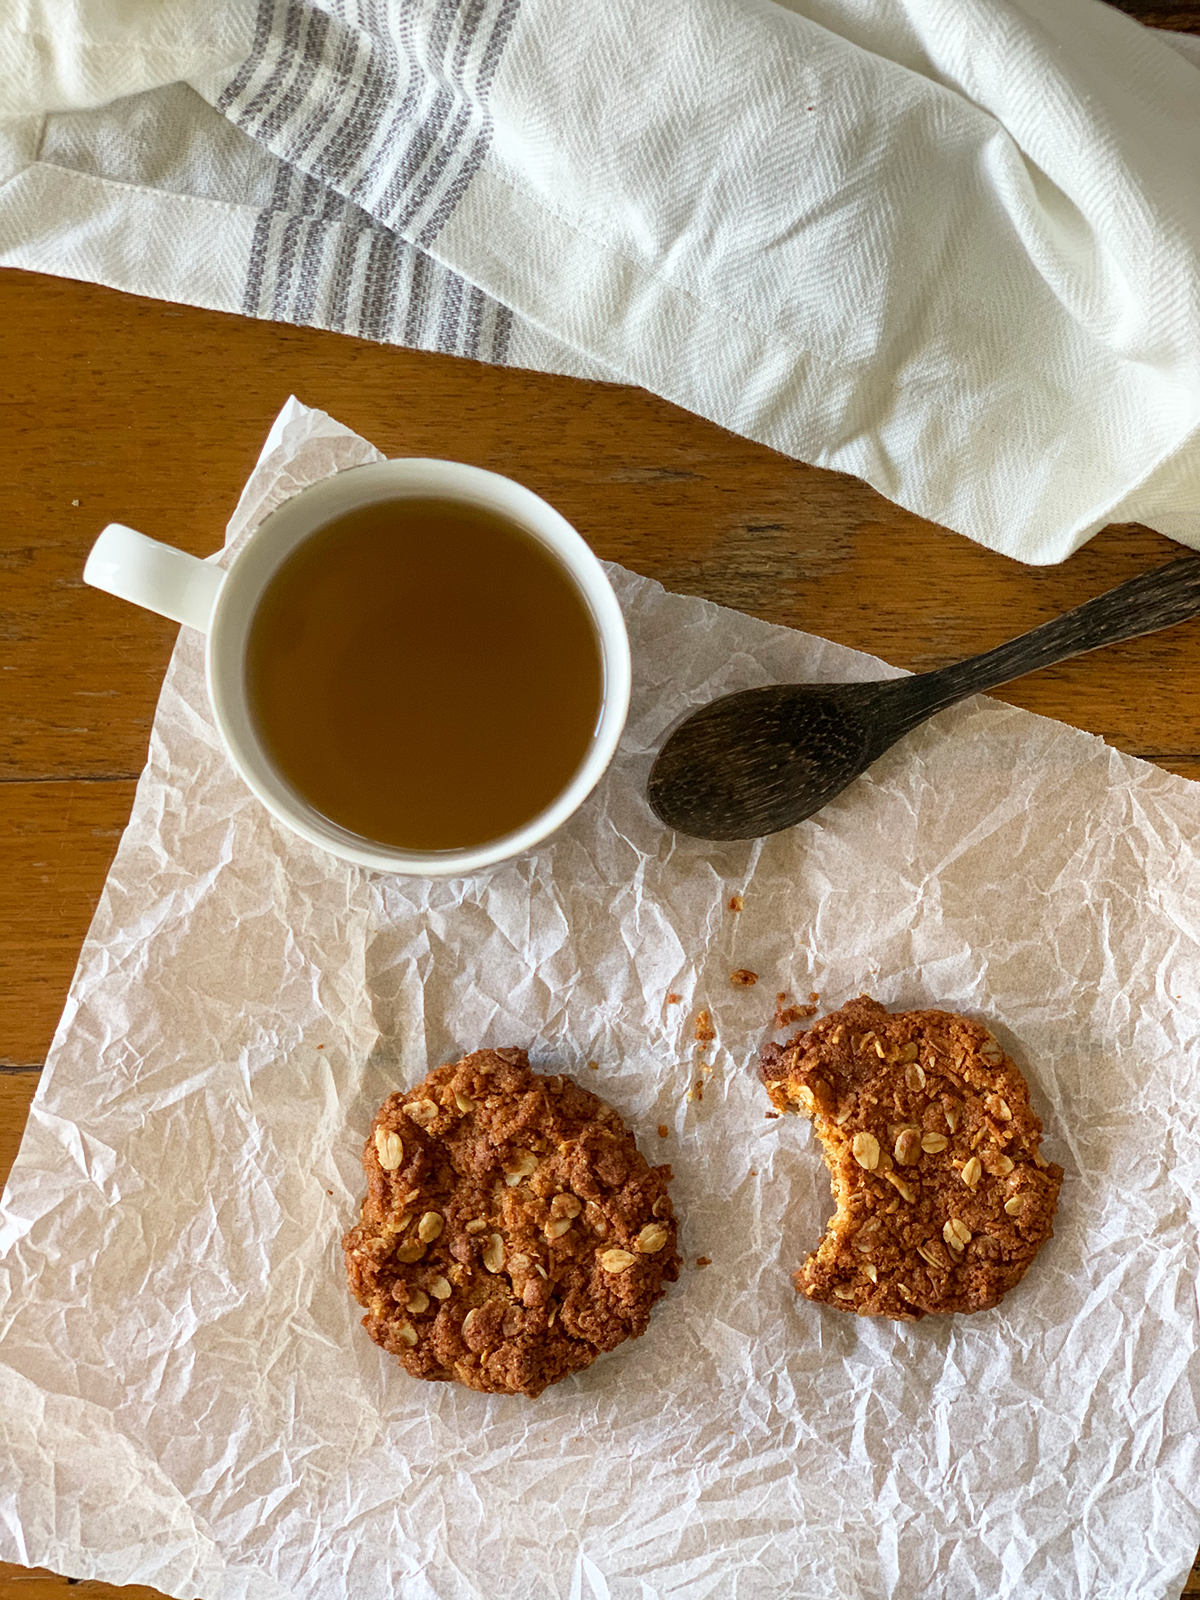 Two ANZAC biscuits one with a bite out of it with a cup of ginger lemongrass tea